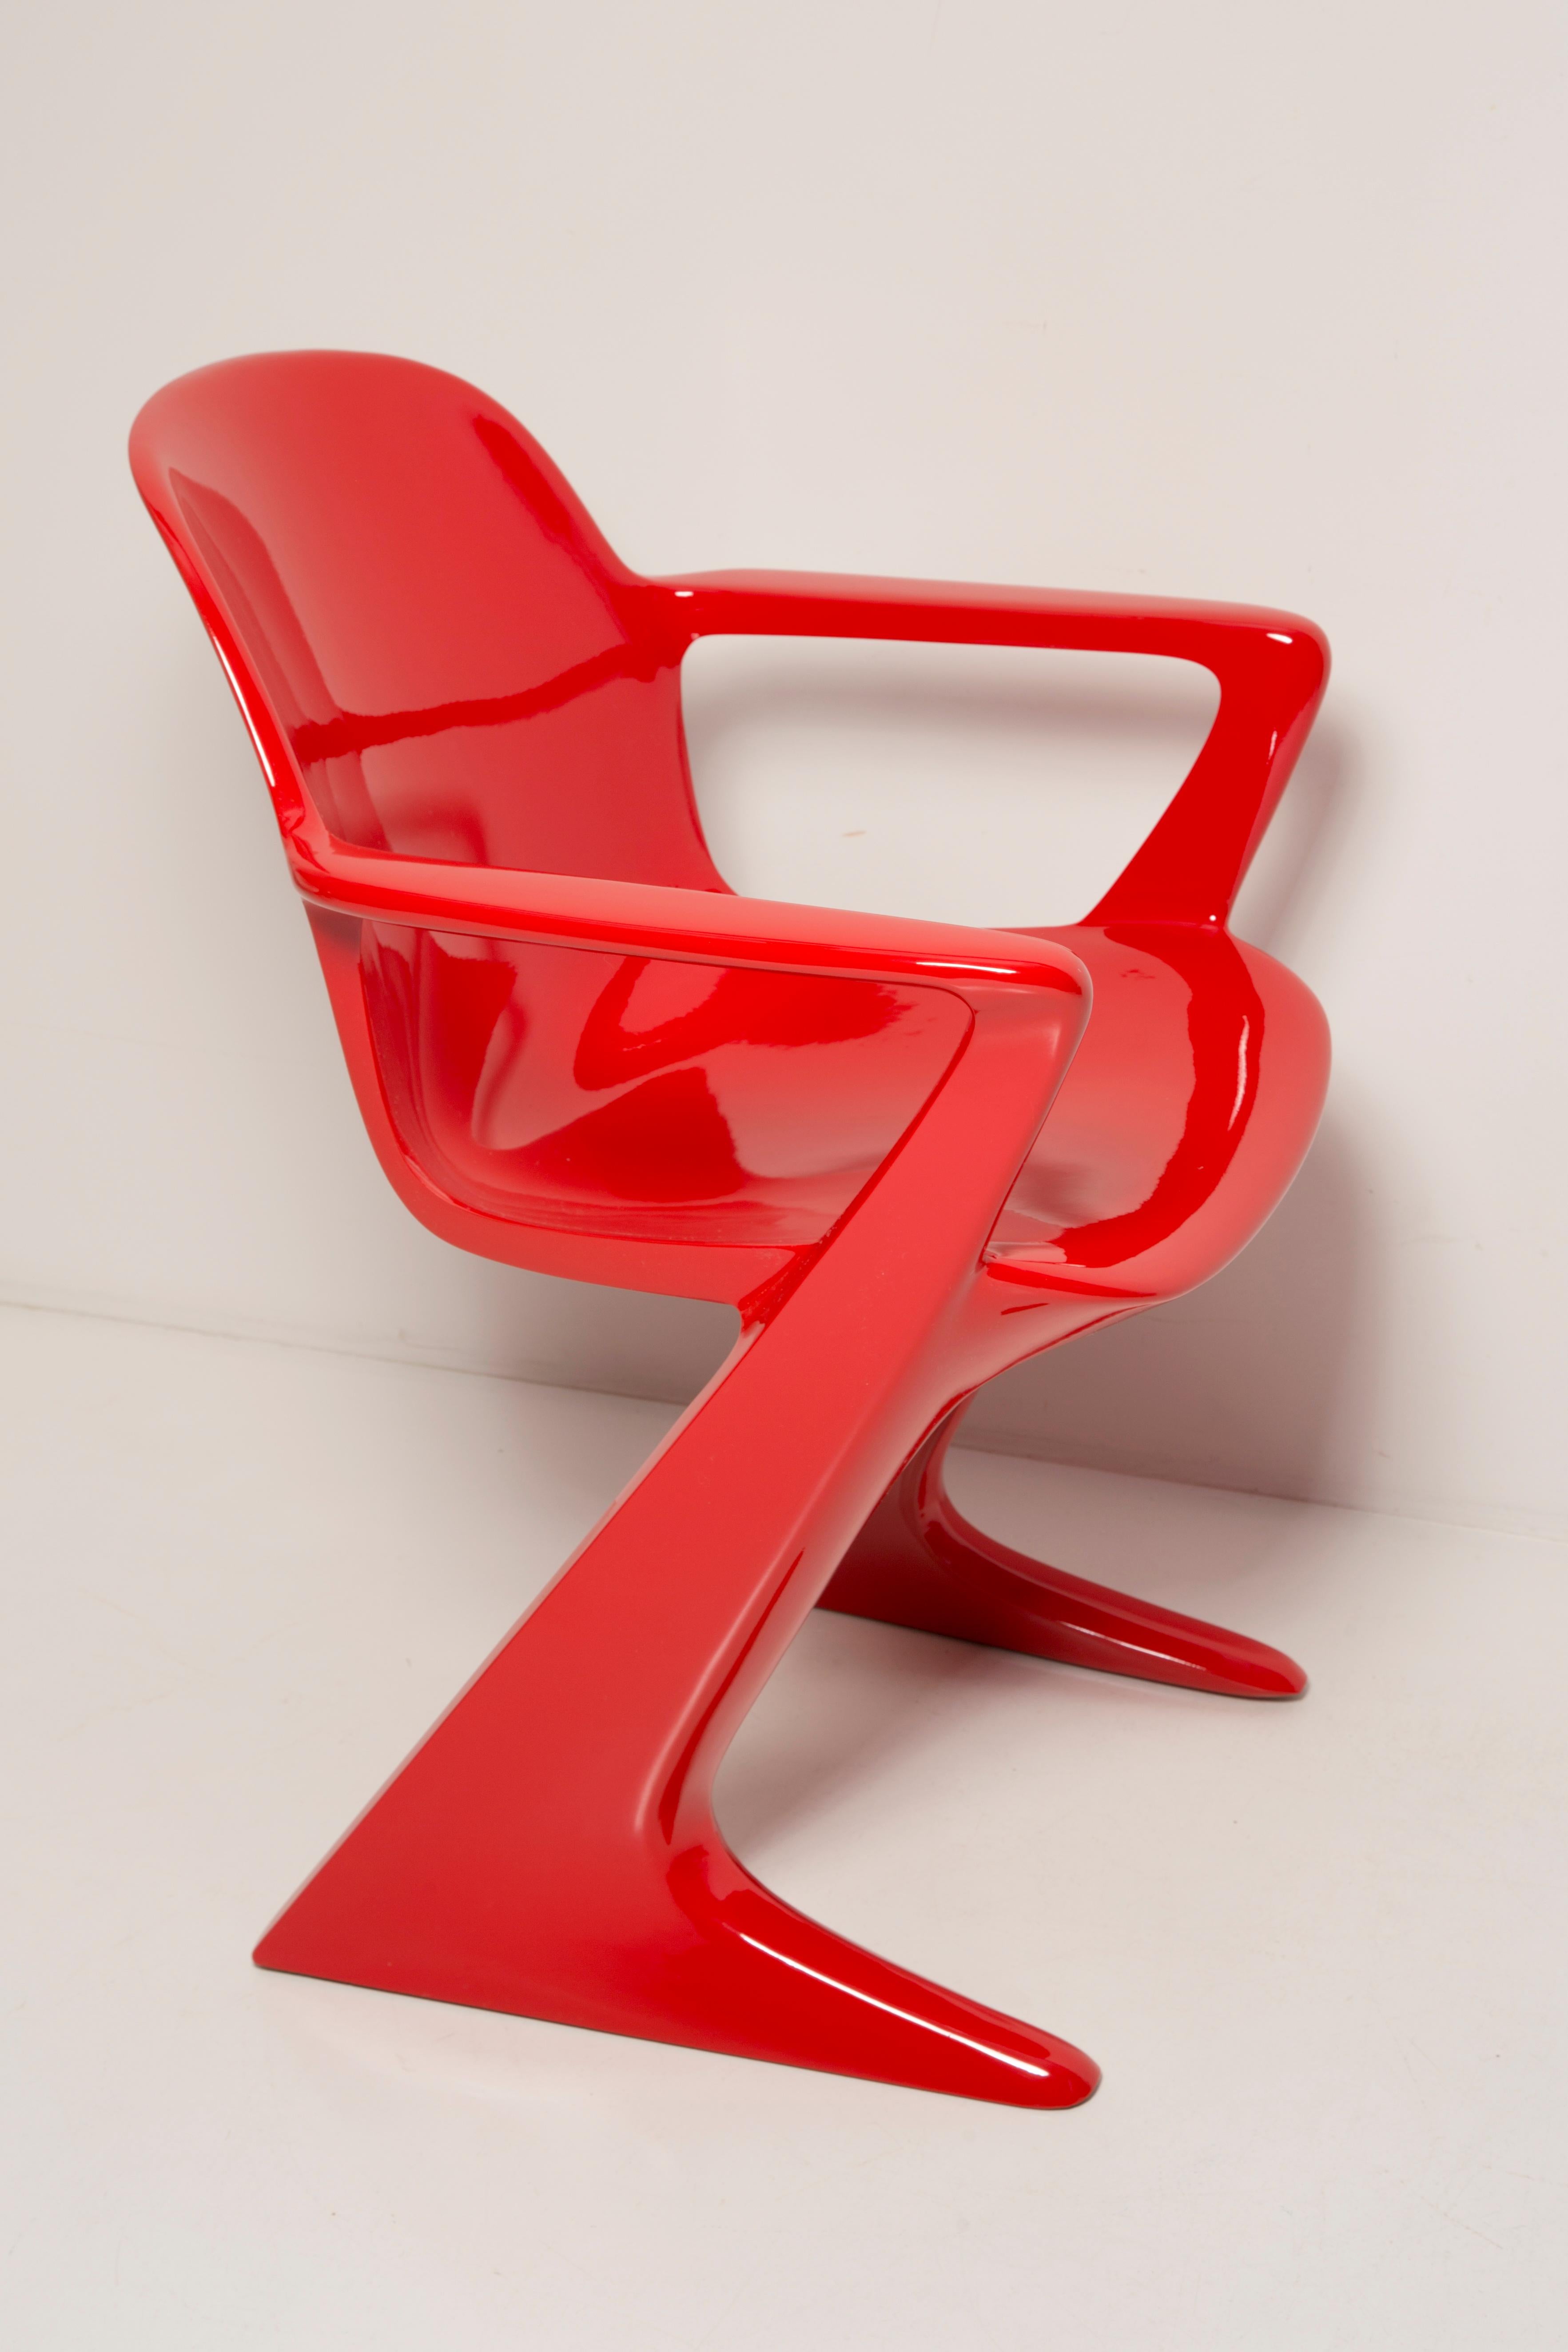 Midcentury Signal Red Kangaroo Chair Designed by Ernst Moeckl, Germany, 1968 For Sale 2